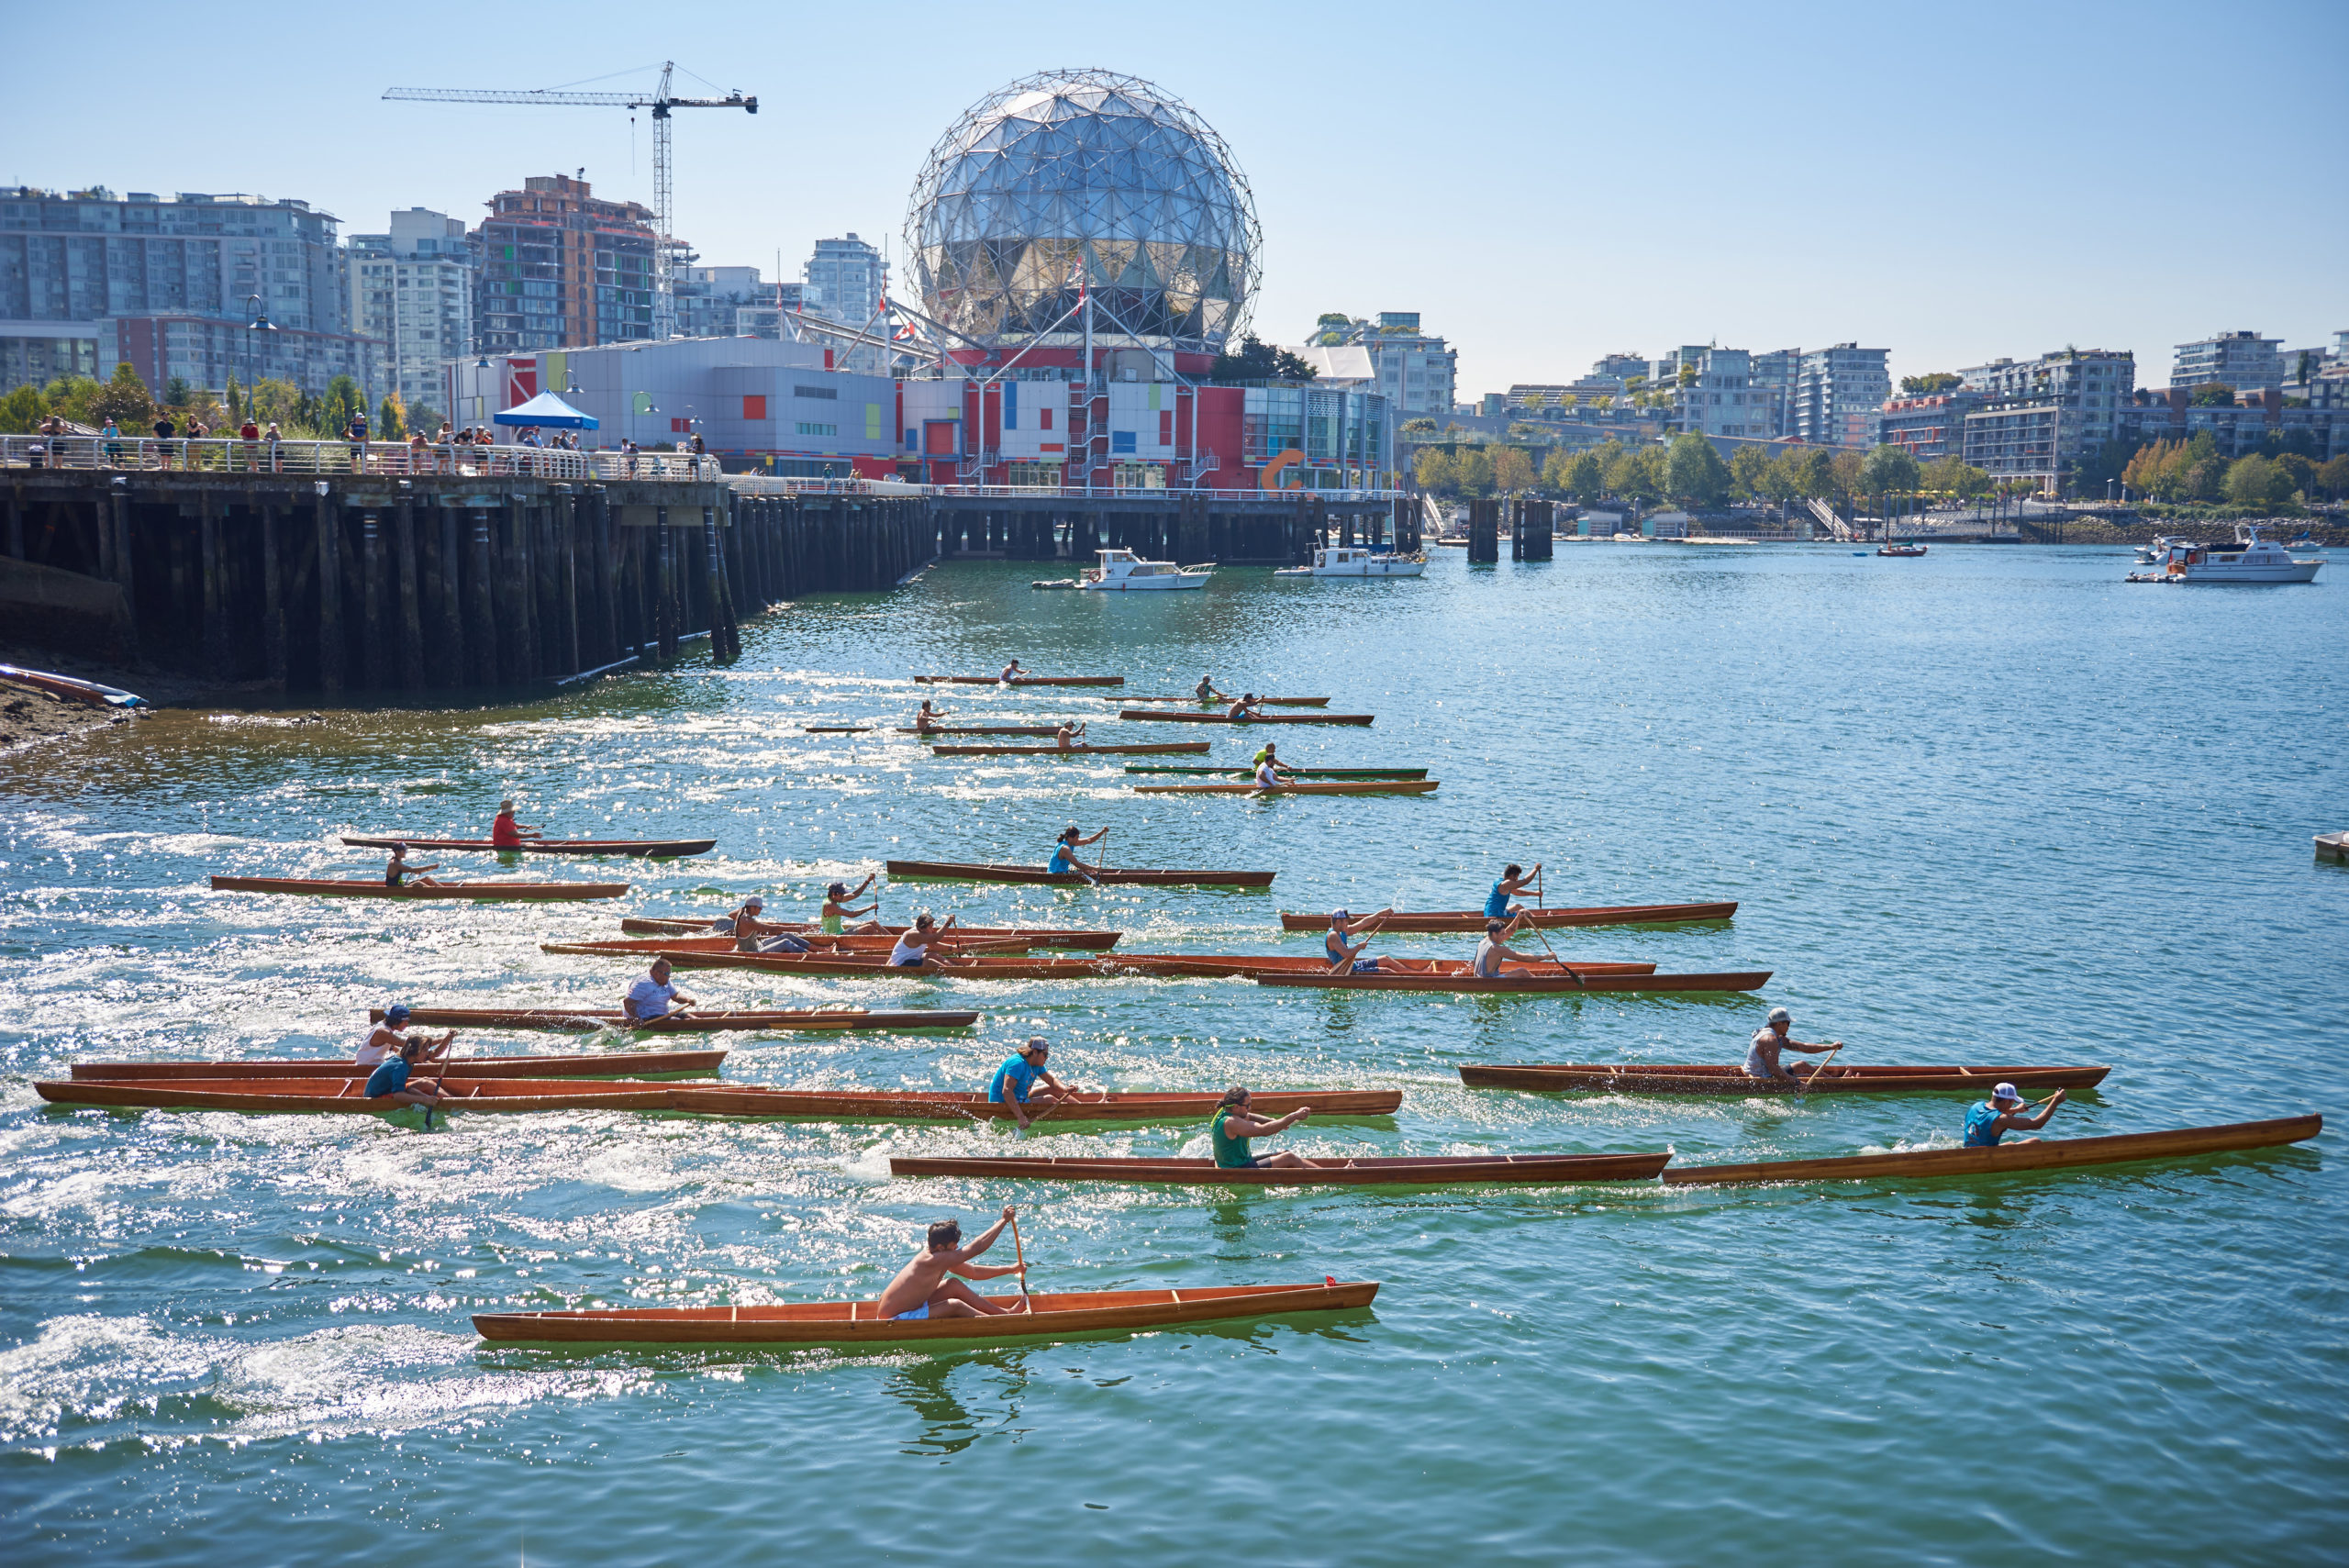 Canoe race with Science World in the background